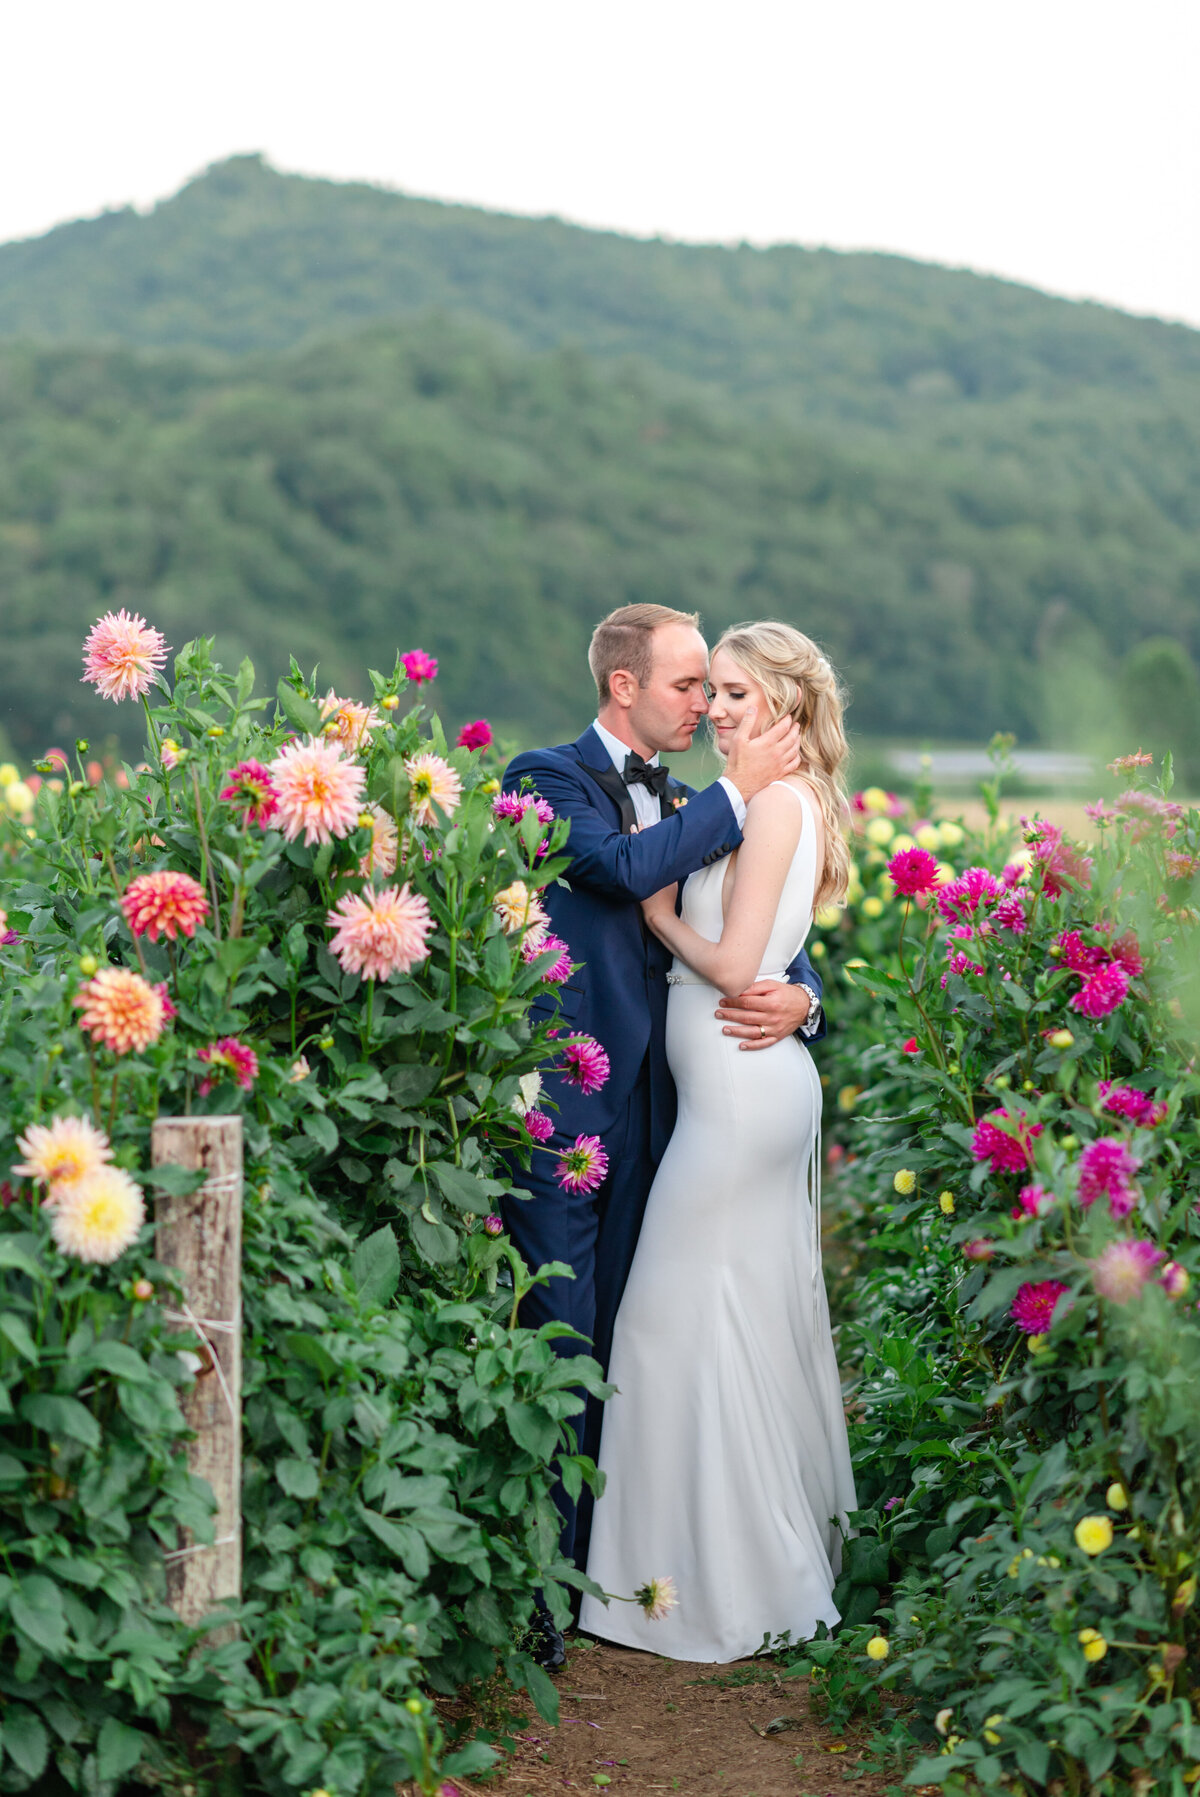 Bride and groom embrace in flowers